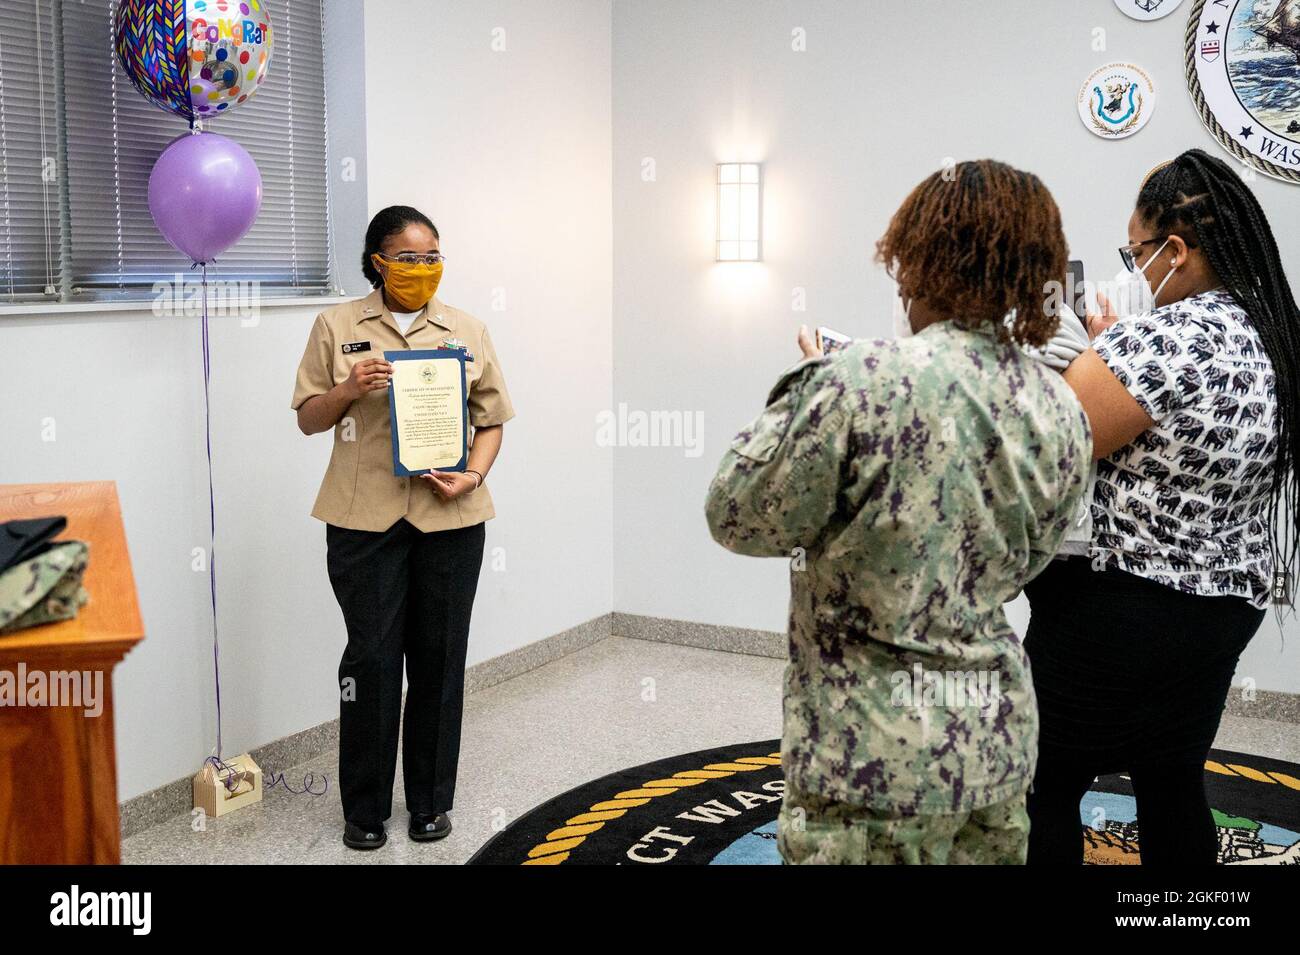 WASHINGTON, DC (April 2, 2021) – Culinary Specialist 2nd Class Sheniqua Lee, left, poses for a photo following her reenlistment ceremony onboard Washington Navy Yard. Stock Photo